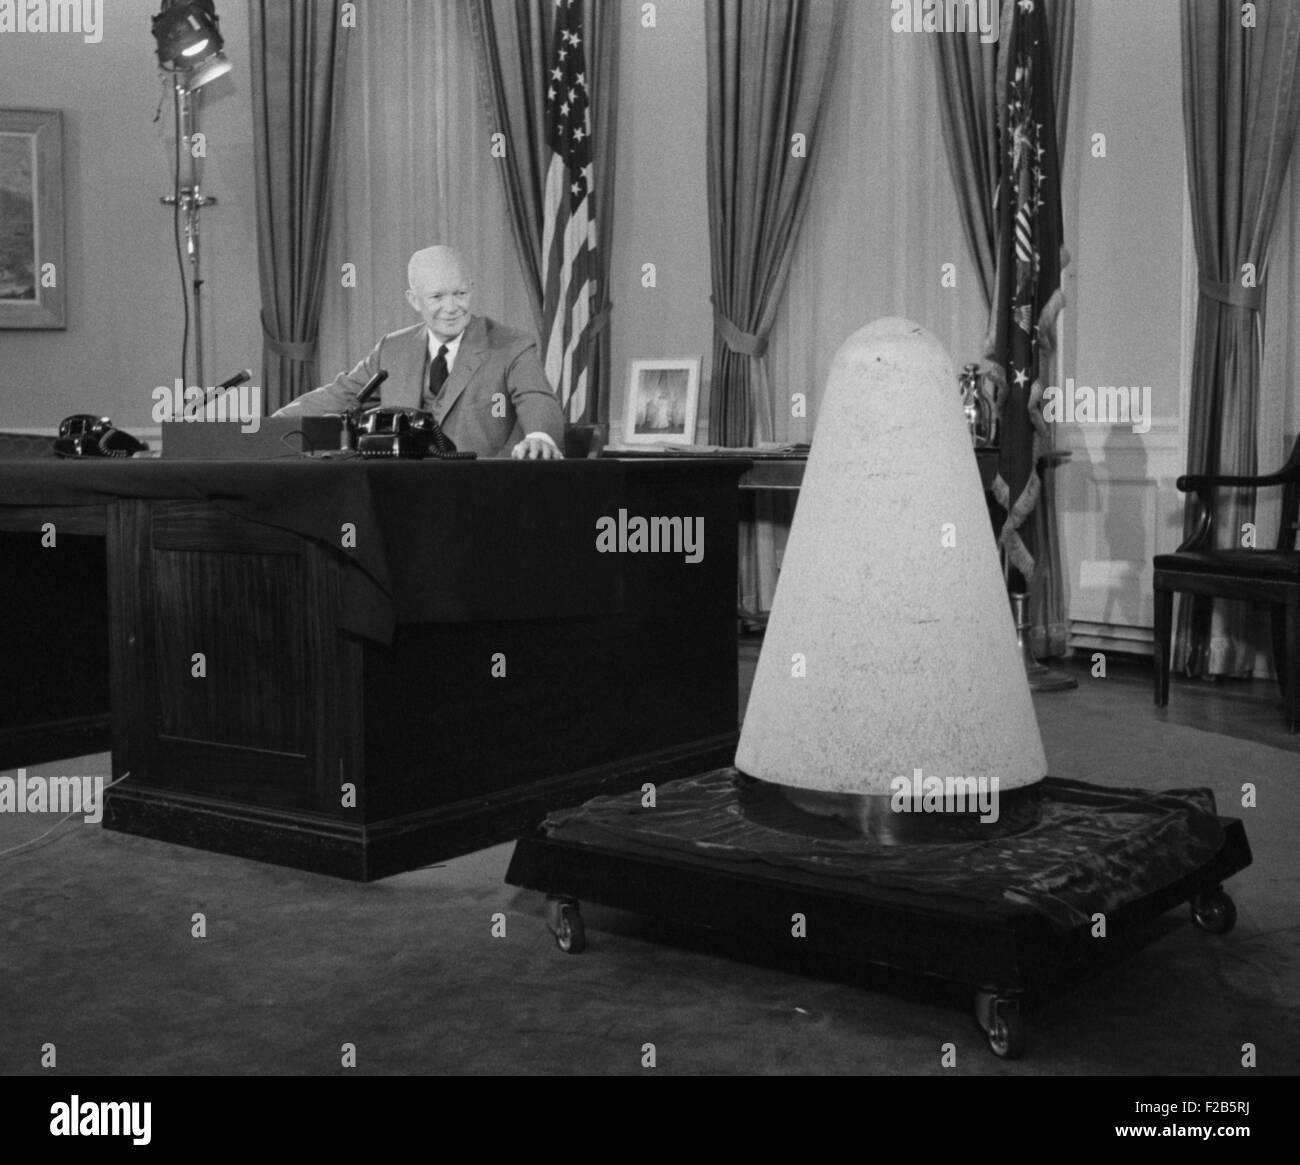 President Eisenhower giving a television speech about science and national security. He spoke from the Oval Office and displayed a nose cone of an experimental missile which had been into space and back. Nov. 7, 1957. A month earlier, the Soviet Union launched Sputnik. - (BSLOC 2014 16 76) Stock Photo